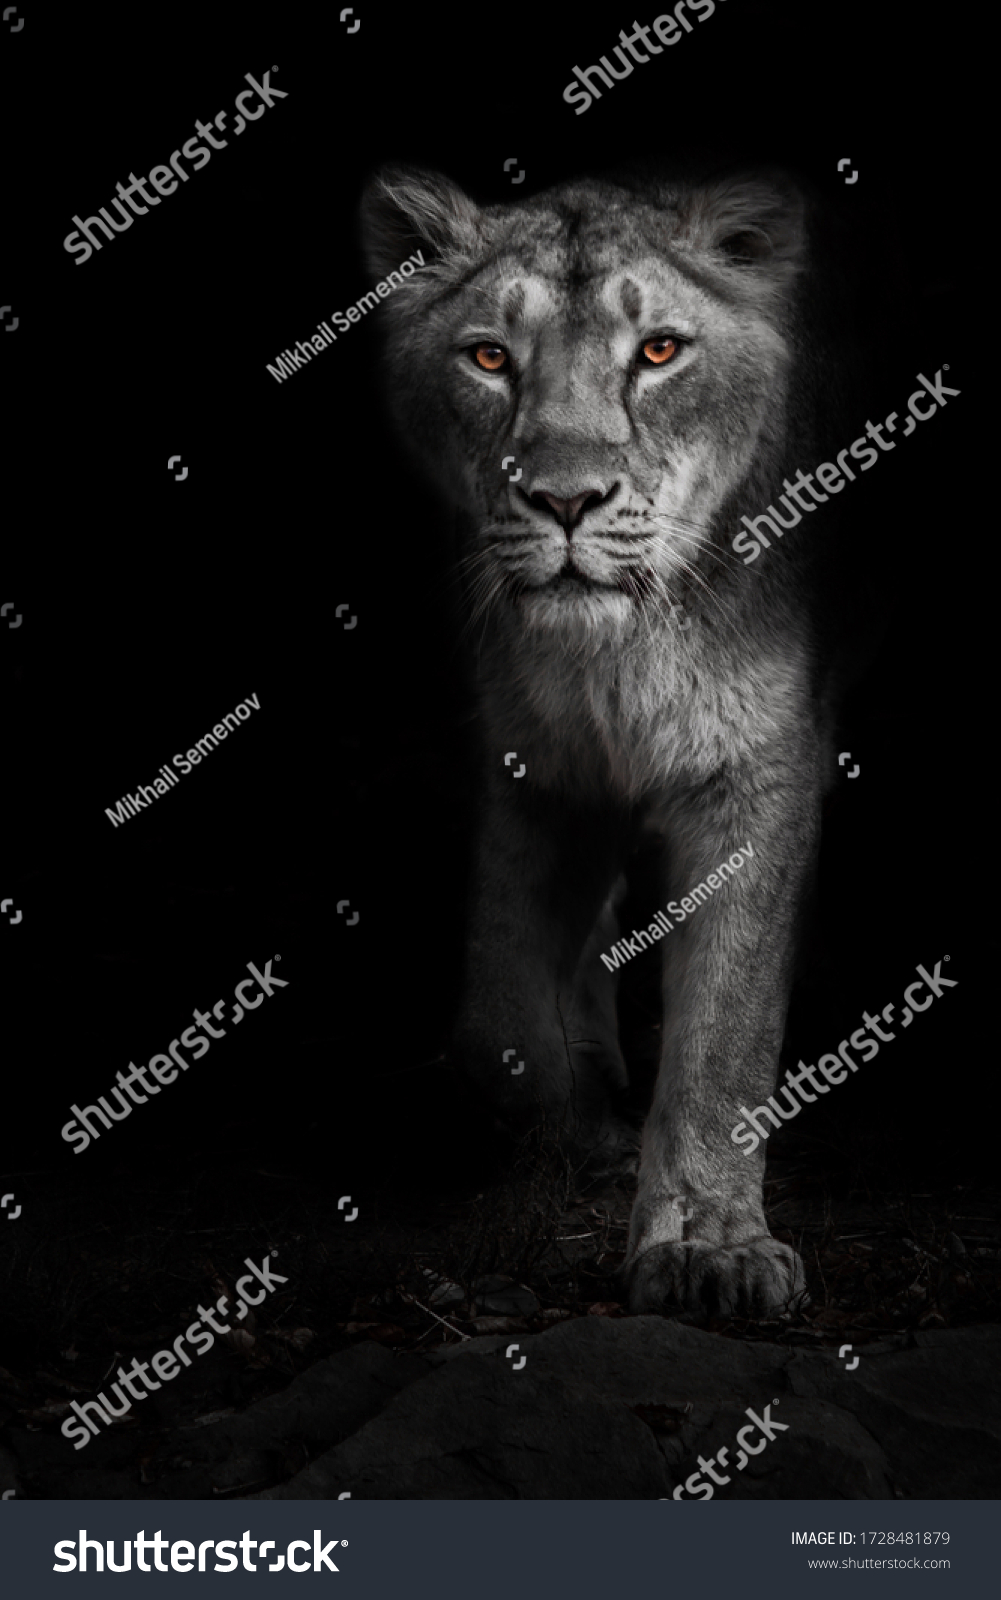 Ashen white, ashen moonlit night lioness in darkness with bright ebony eyes. Black-beast with colored eyes #1728481879